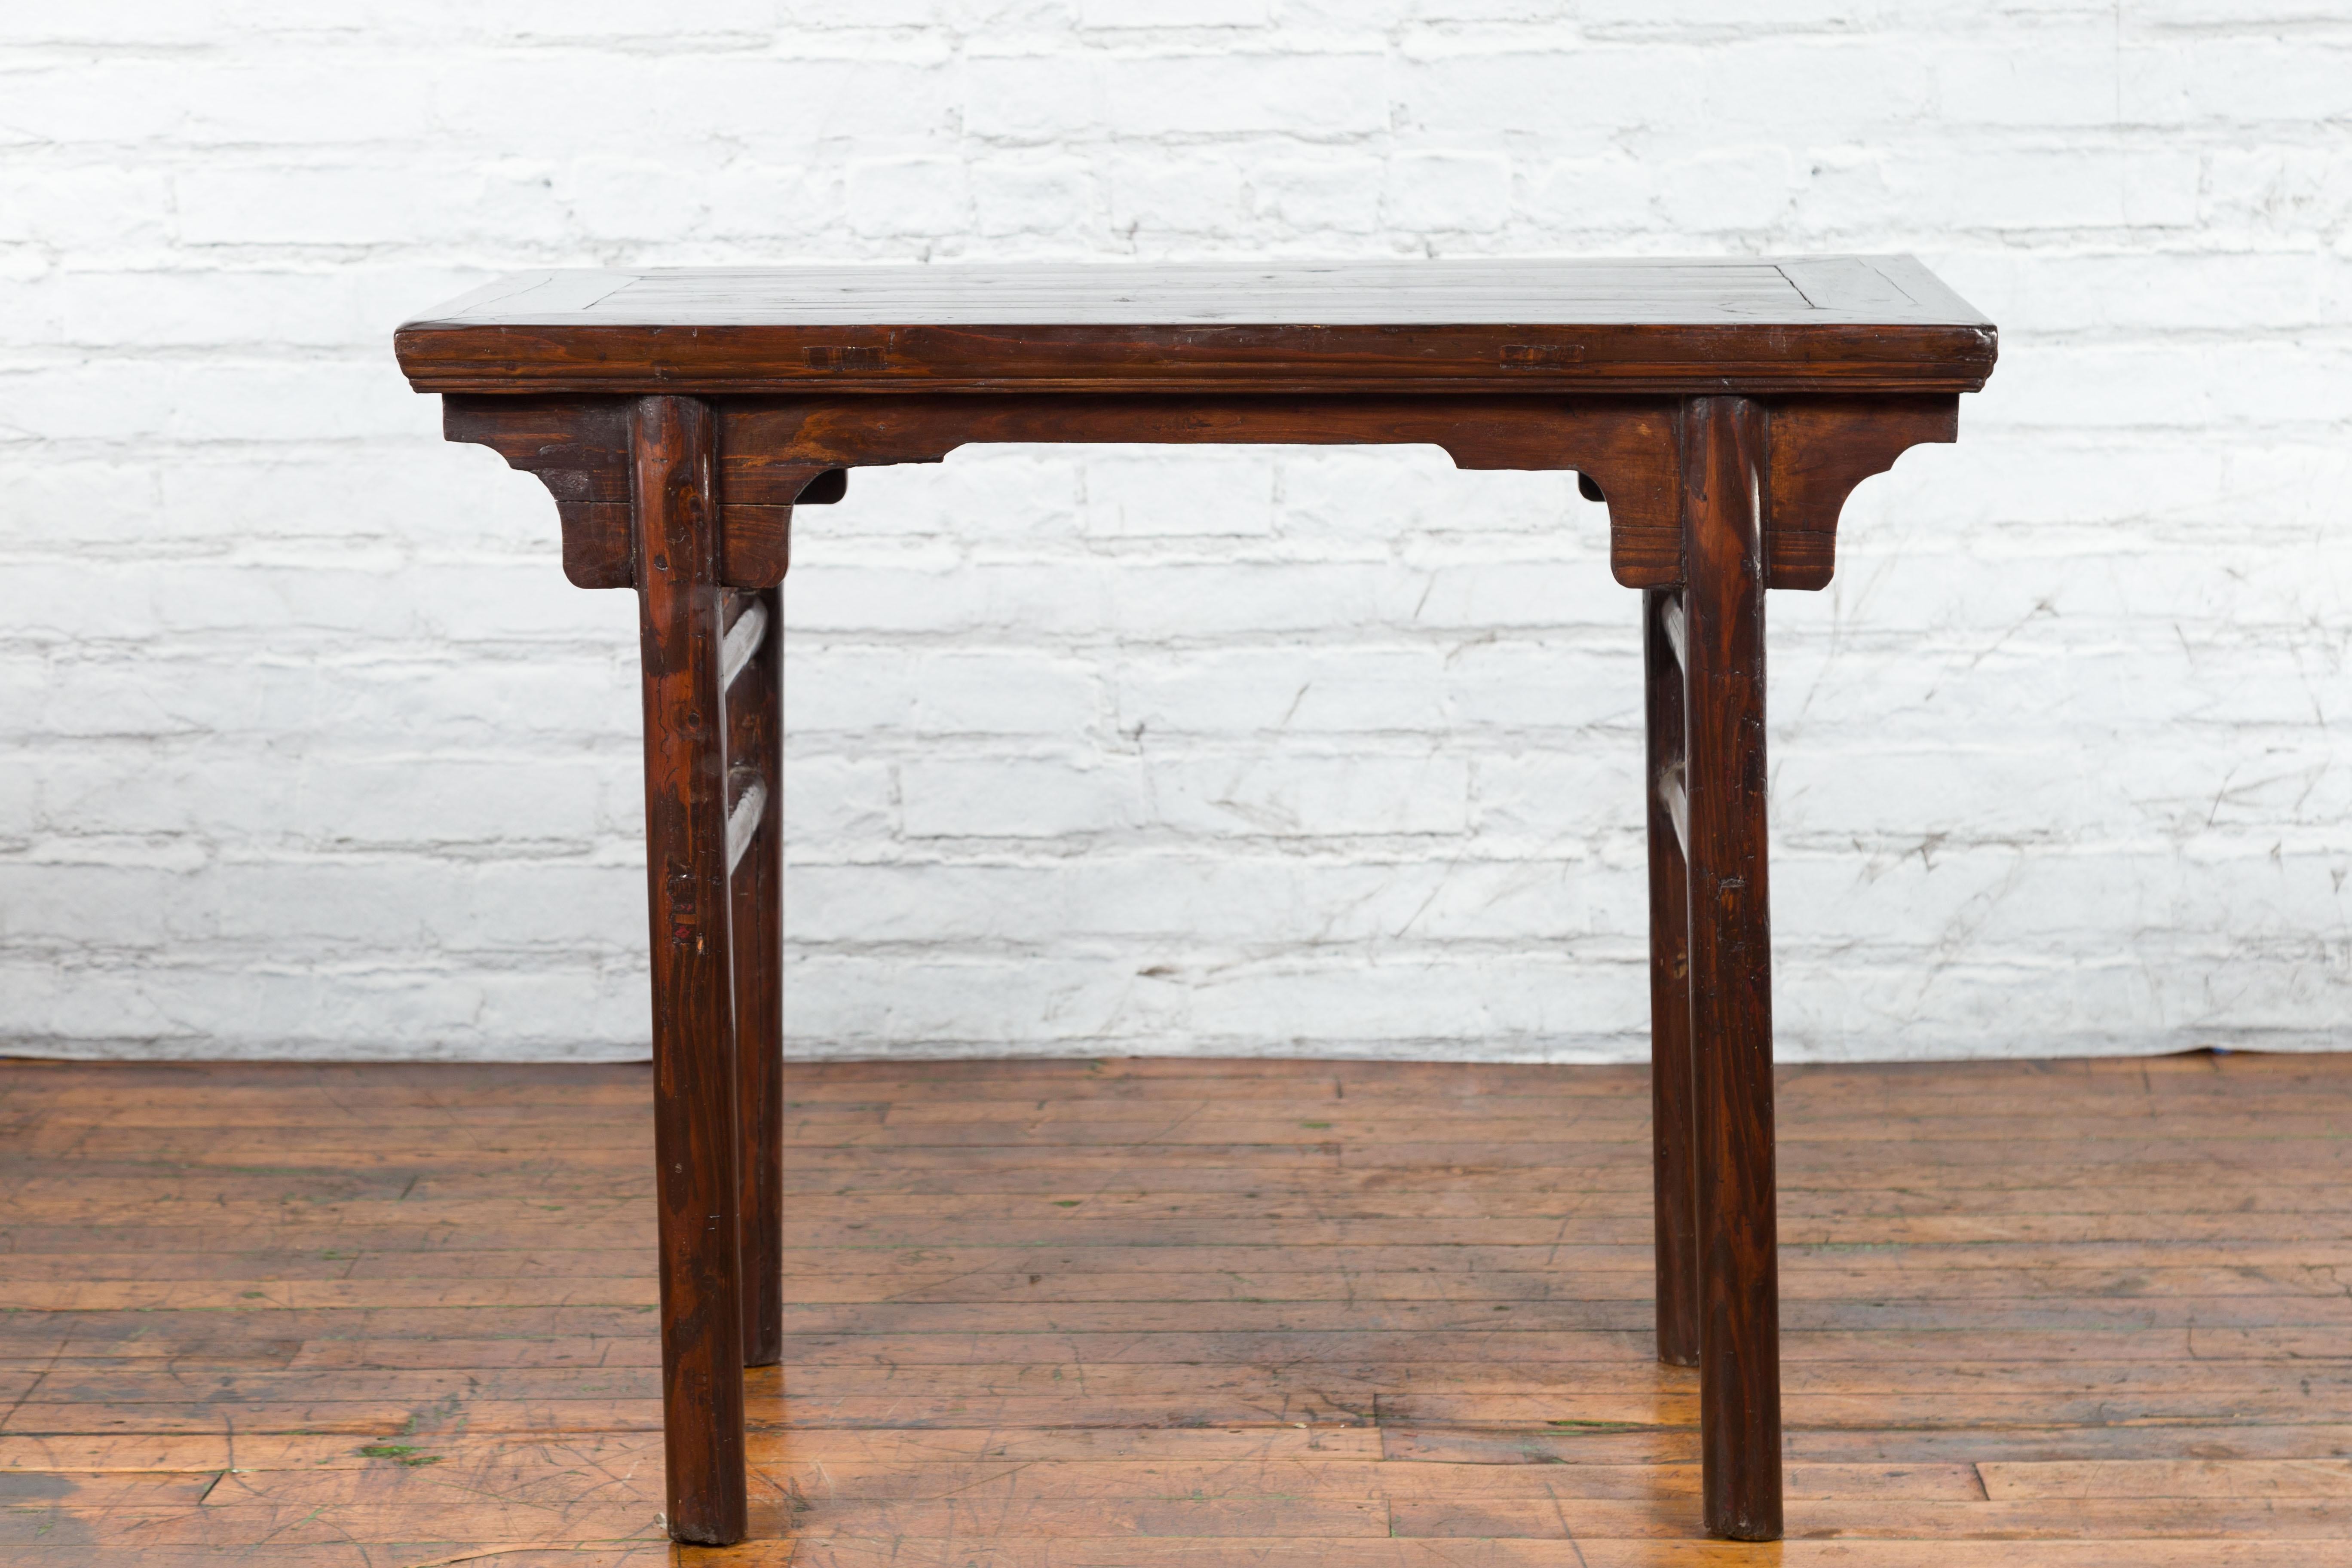 A Chinese Qing Dynasty period altar console table from the 19th century with carved spandrels and side stretchers. Created in China during the Qing Dynasty, this wooden altar table features a rectangular top with central board, sitting above four